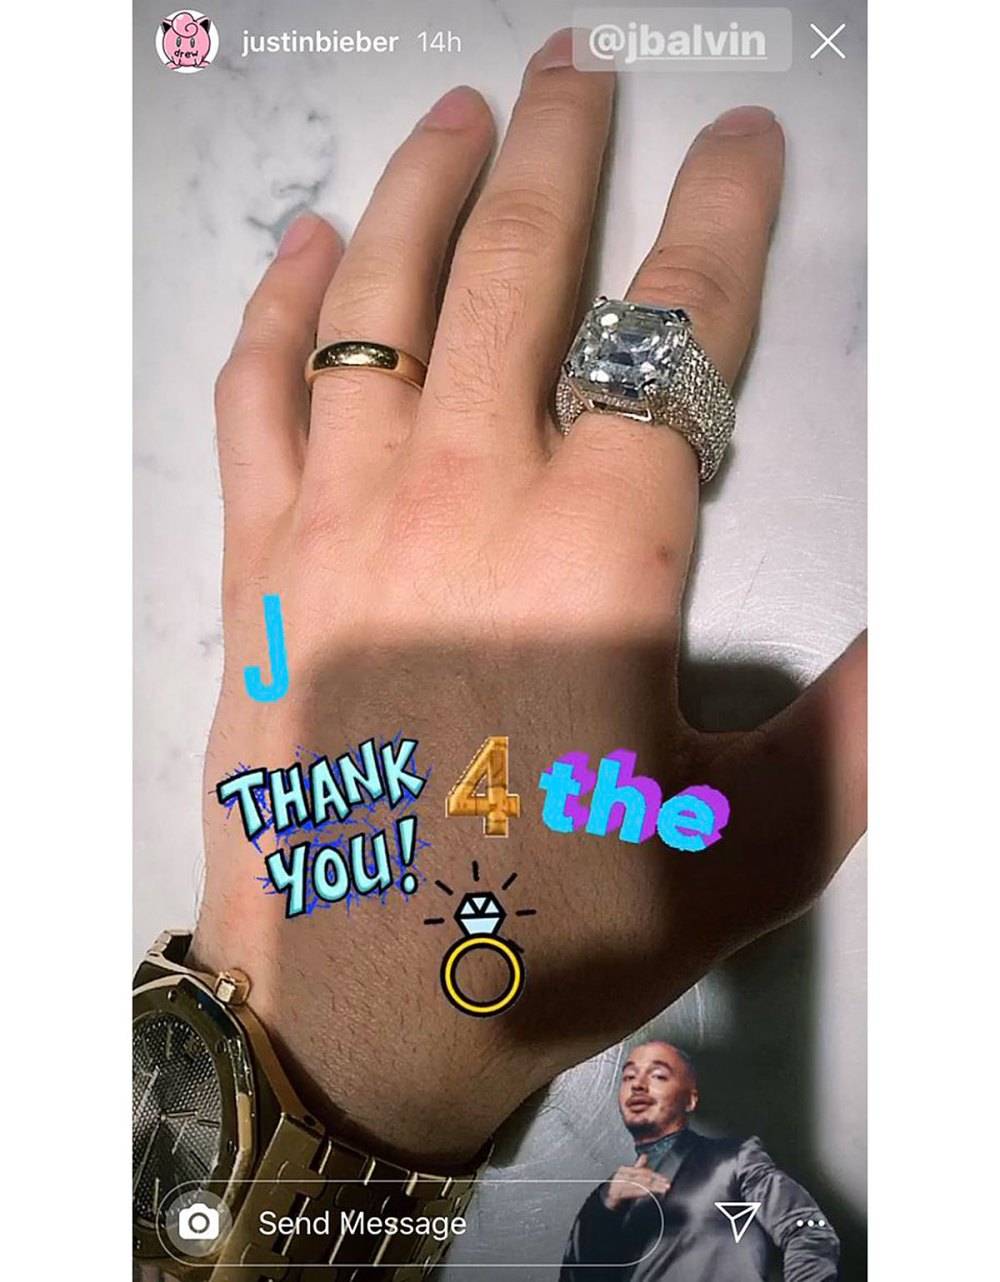 Justin Bieber Gets Ring From J. Balvin